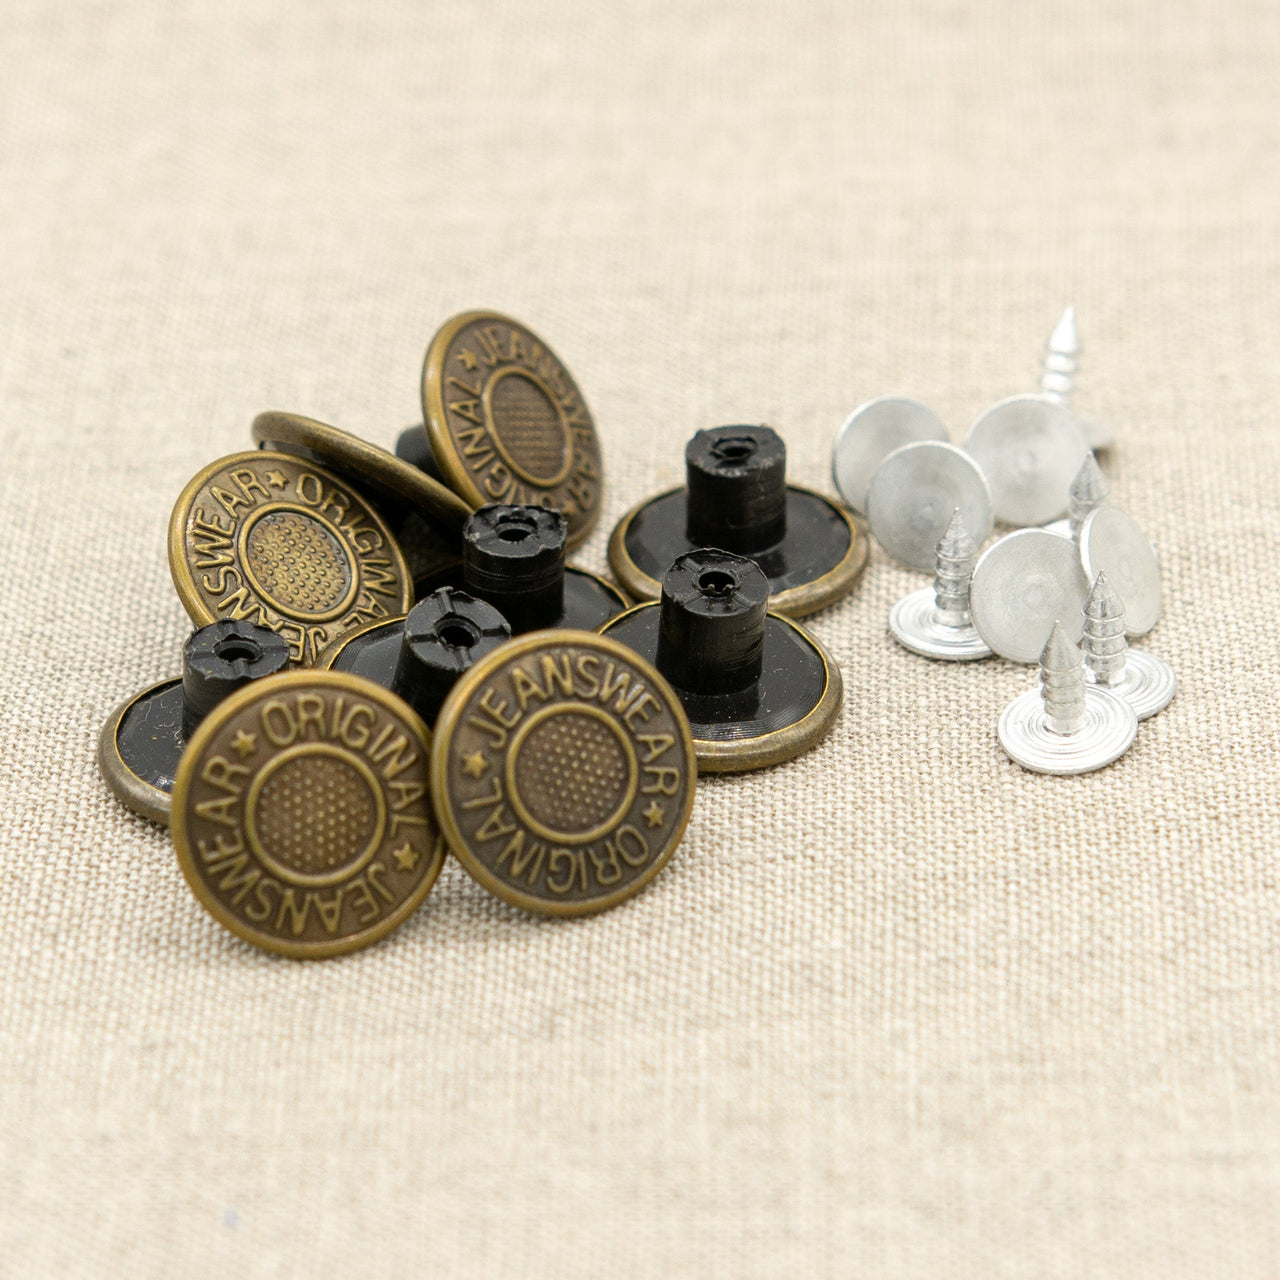 Metal Jeans Buttons